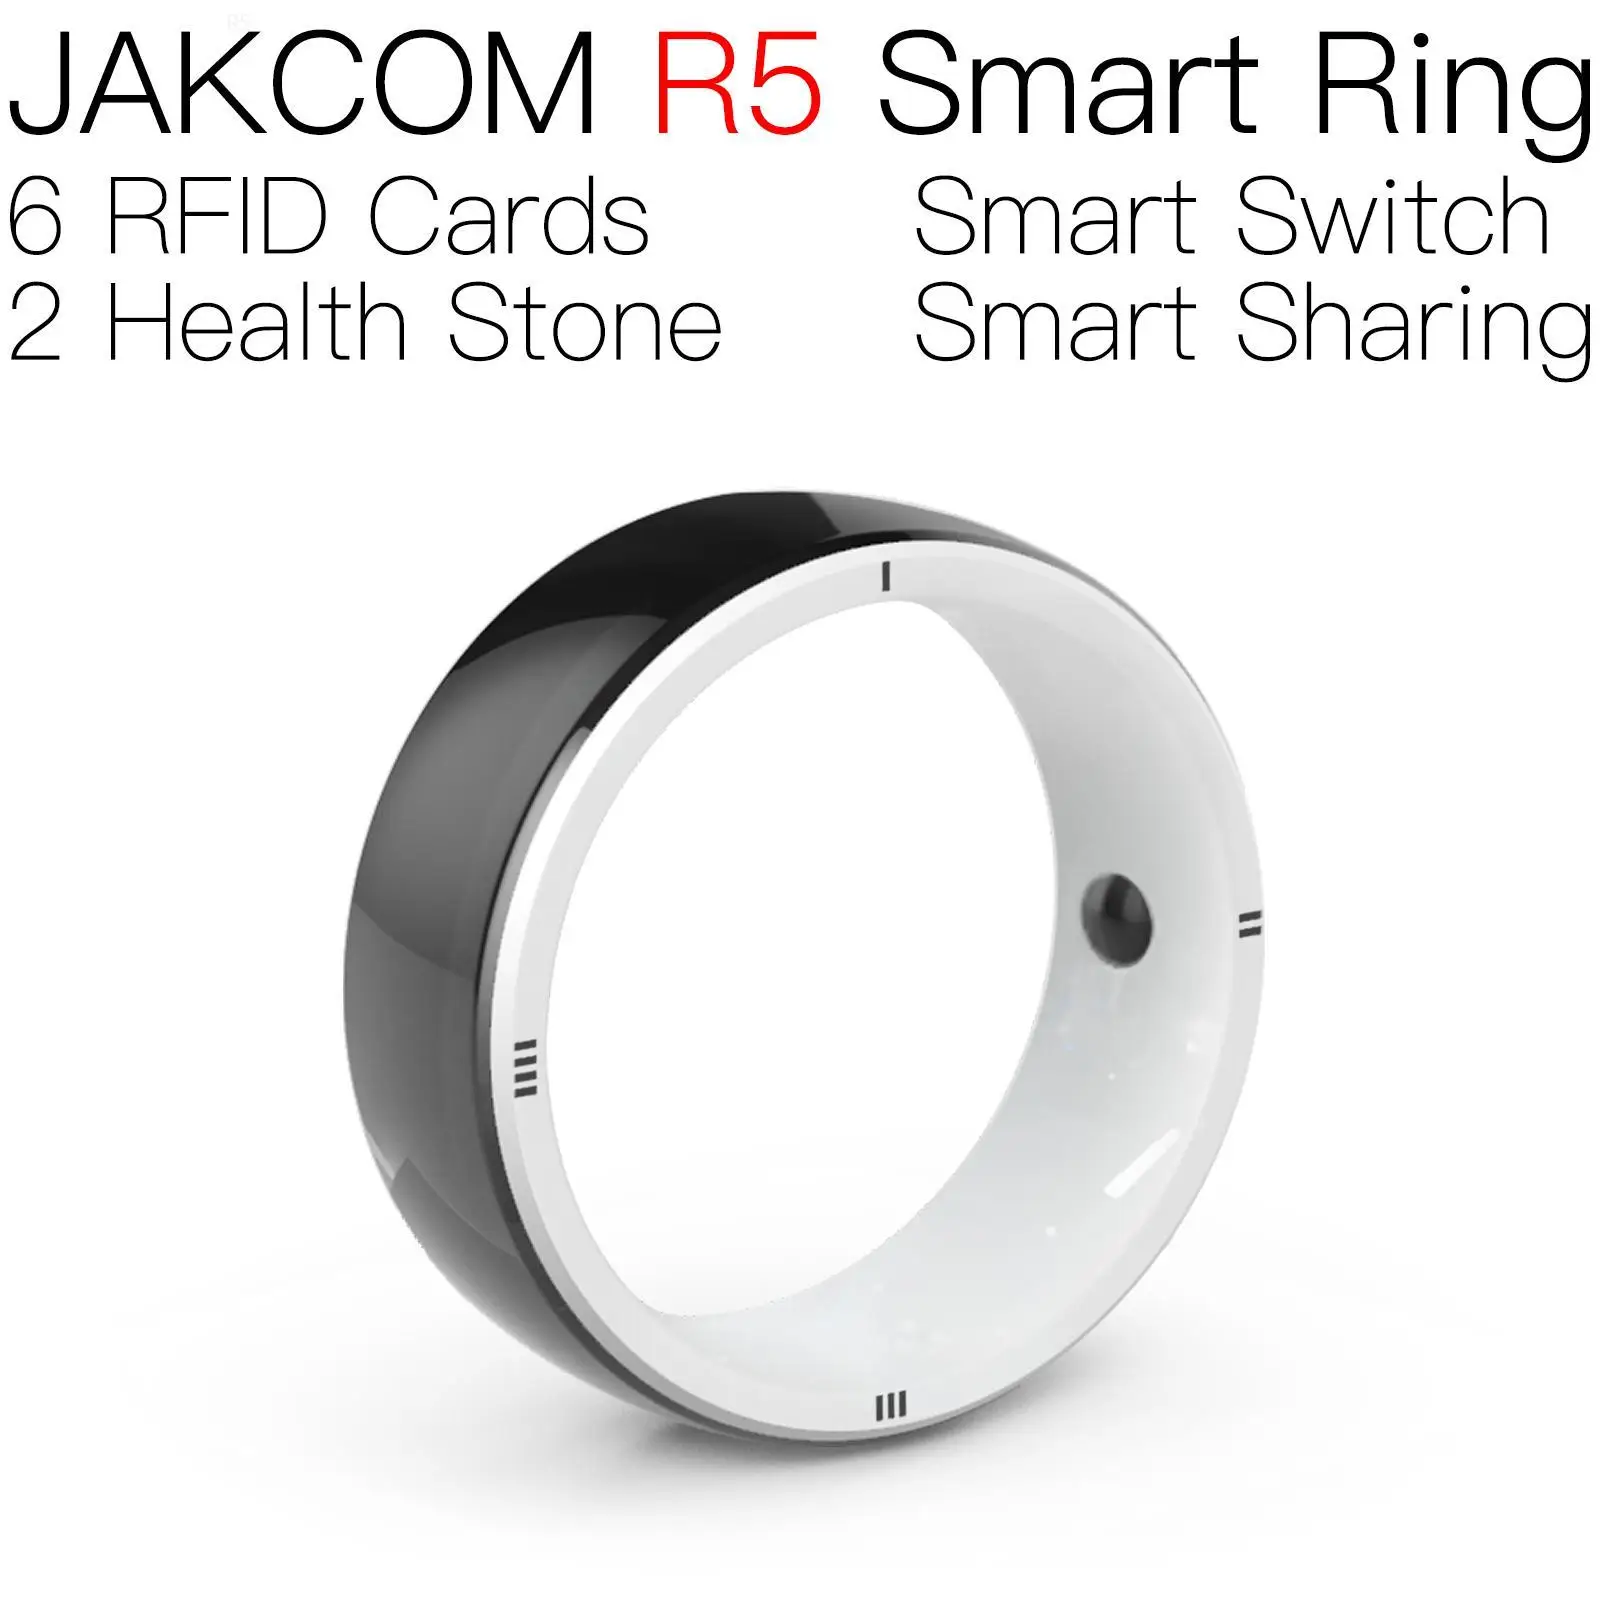 

JAKCOM R5 Smart Ring better than asset tag cg 125 2 rupee items free shipping rfid chip hf nfc capsule game foot towel pattern